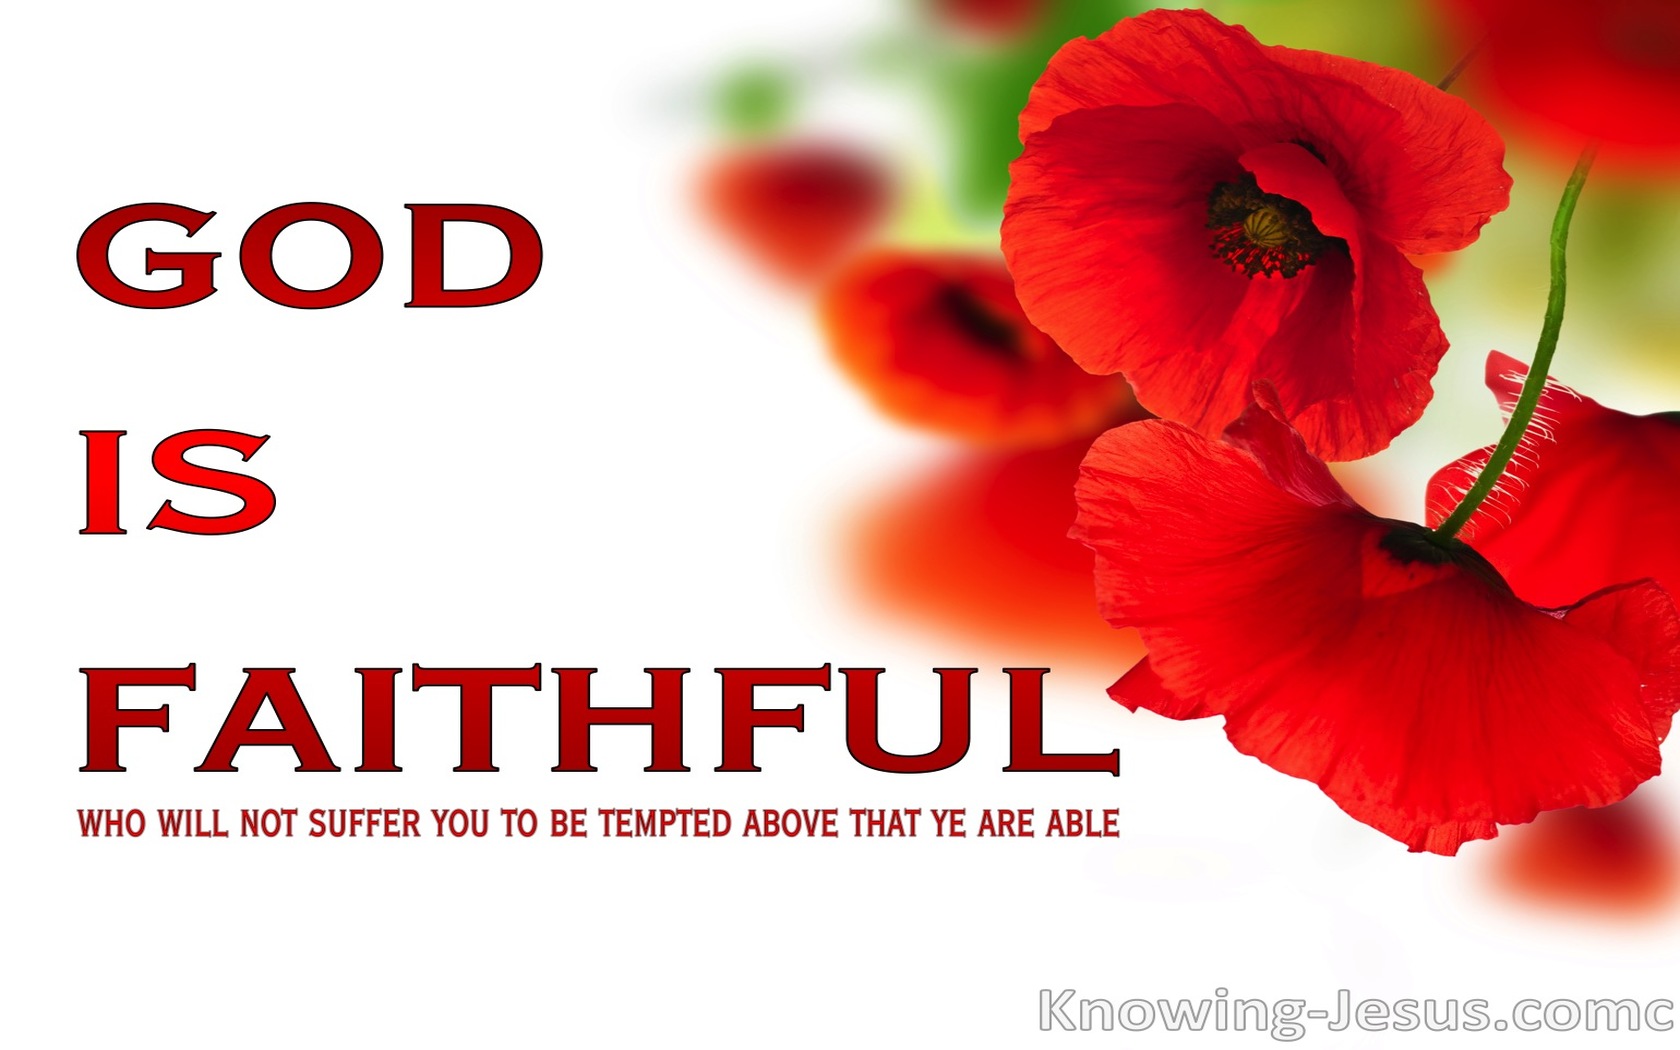 1 Corinthians 10:13 A Modern Day Appointed Place (devotional)01:15 (red)